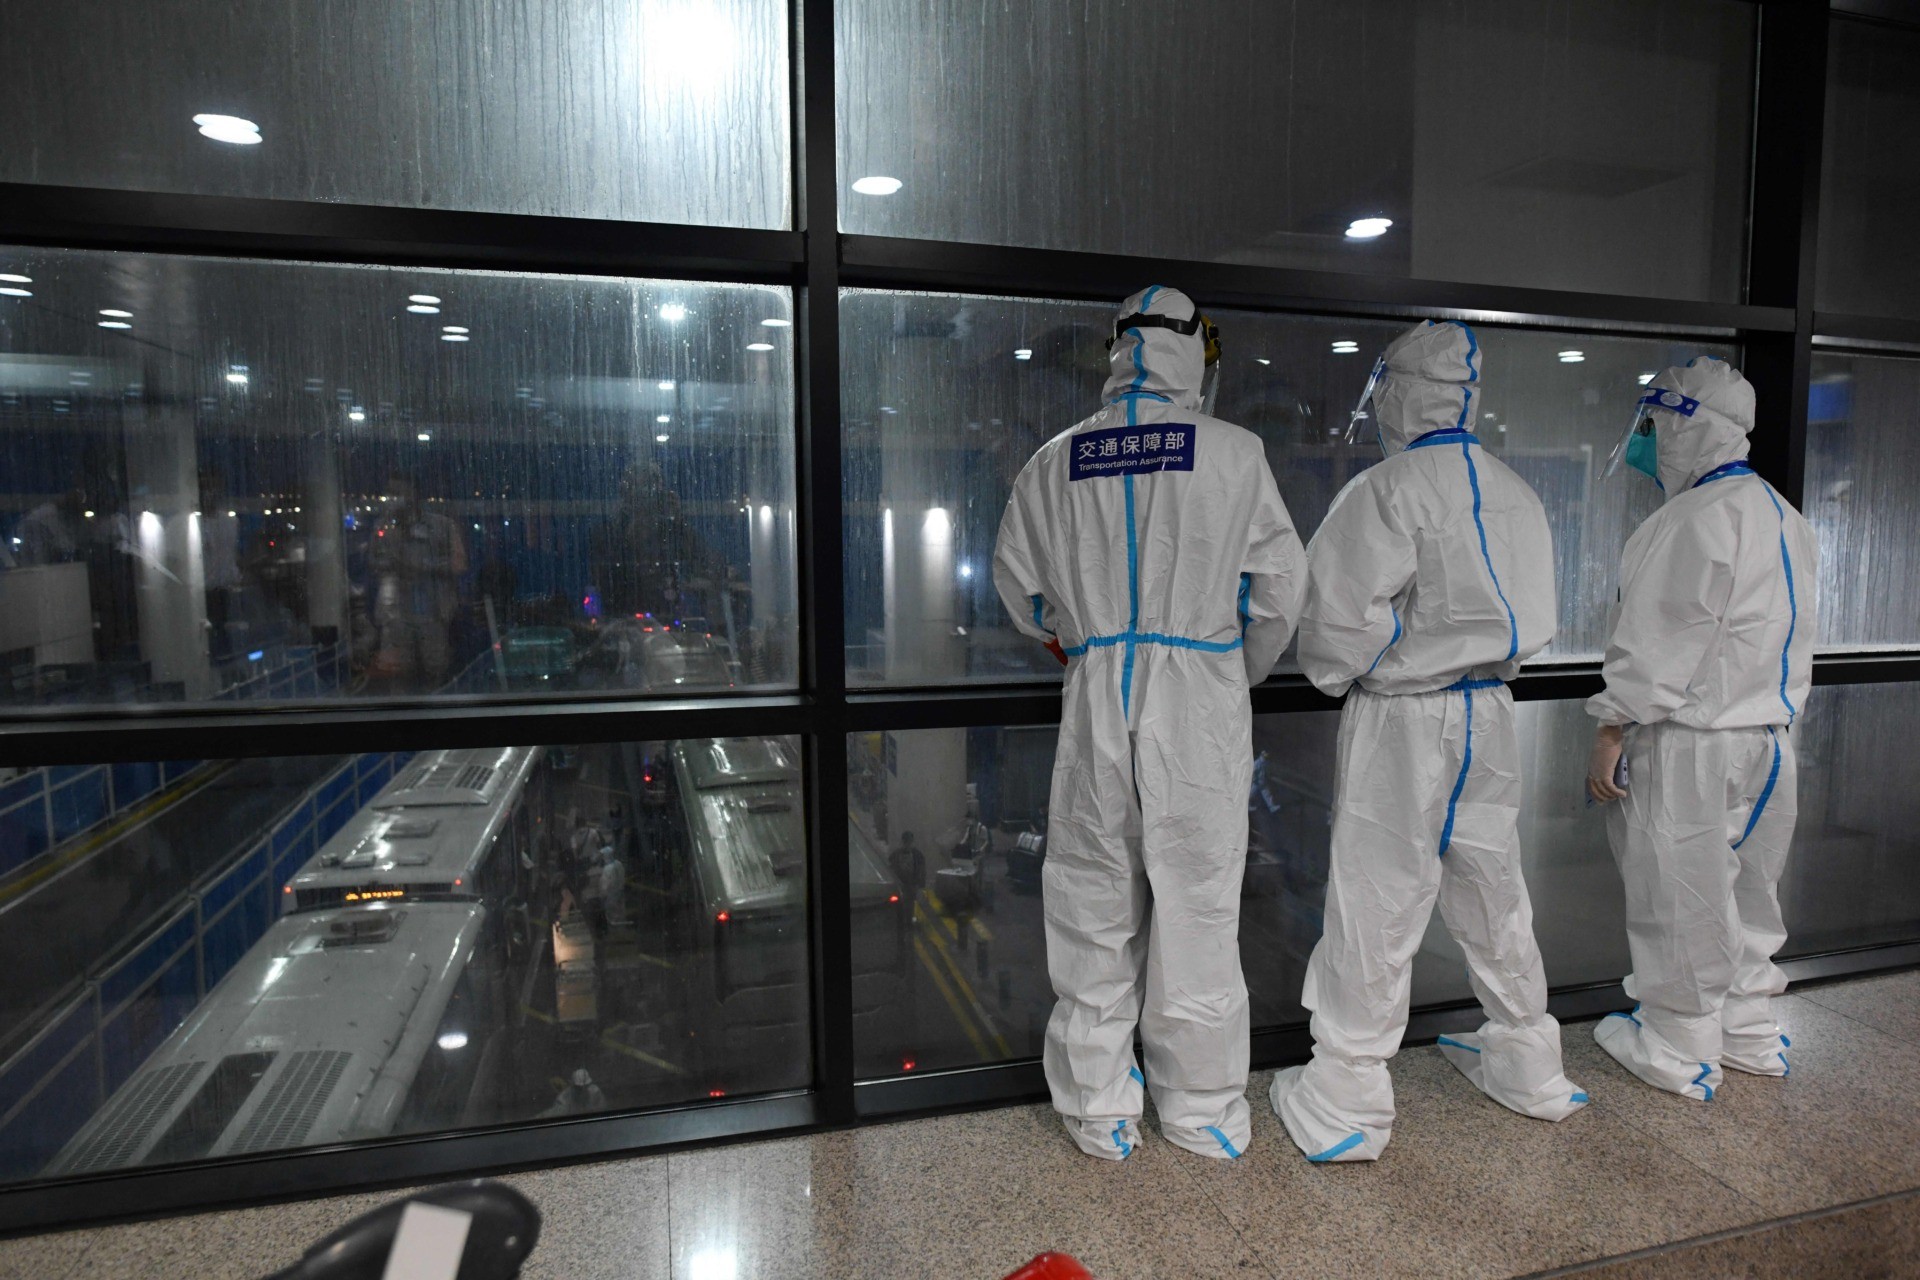 Workers in protective clothing as a precaution against the Covid-19 coronavirus watch over arriving international passengers as they board buses to be taken to quarantine hotels, at Pudong airport in Shanghai on August 13, 2021. (Photo by GREG BAKER / AFP) (Photo by GREG BAKER/AFP via Getty Images)